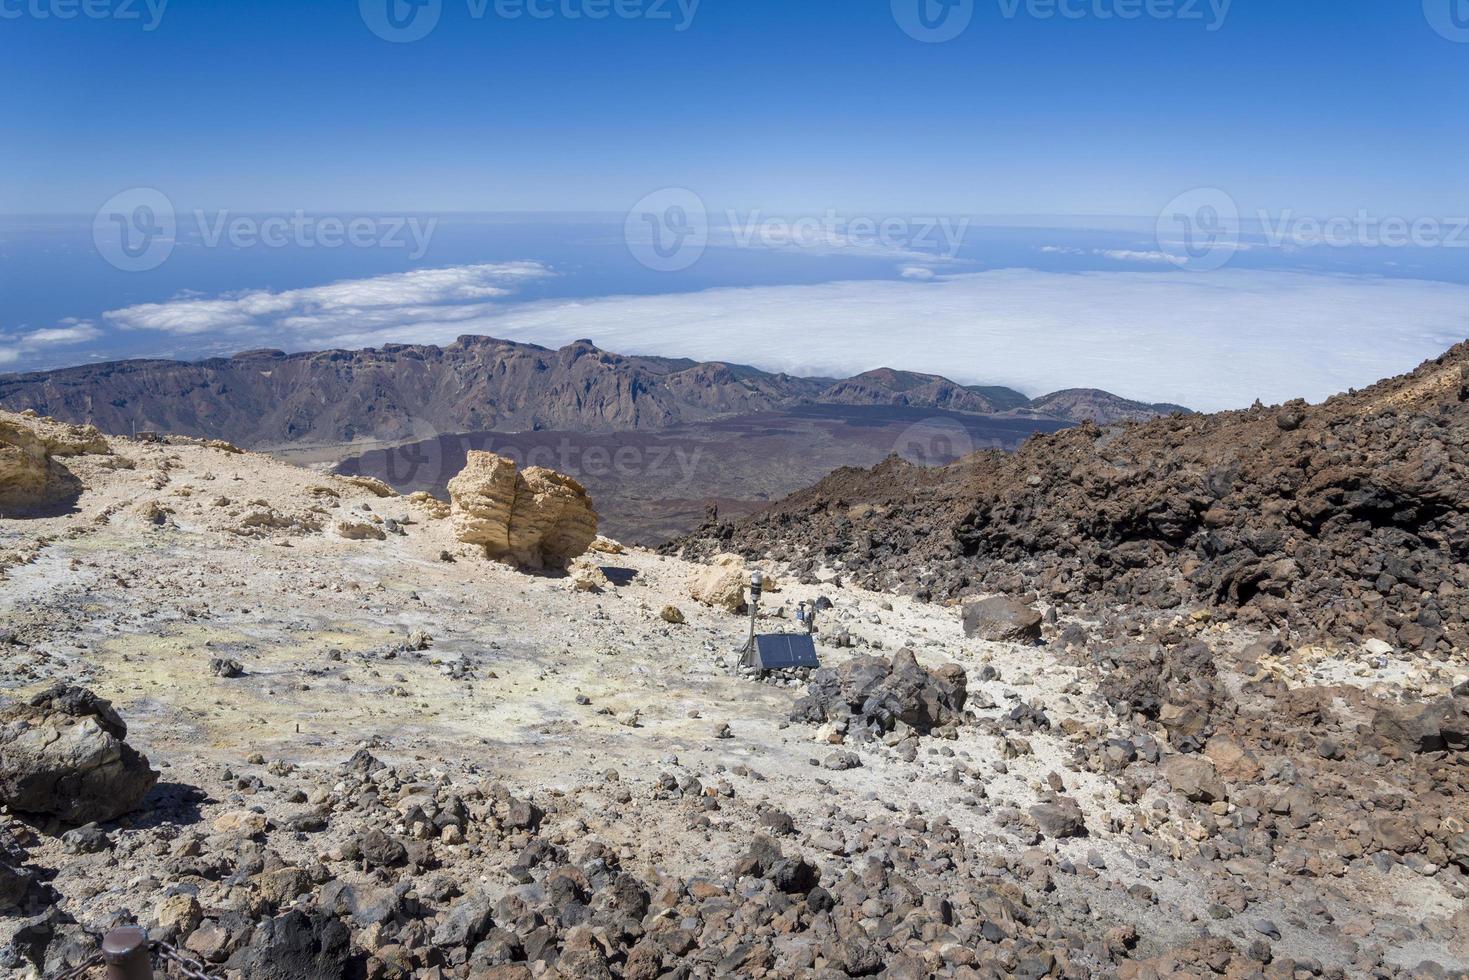 View from Teide Las Canadas Caldera volcano with solidified lava. Teide national Park mountain landscape above the clouds. Tenerife, Canary Islands, Spain. photo